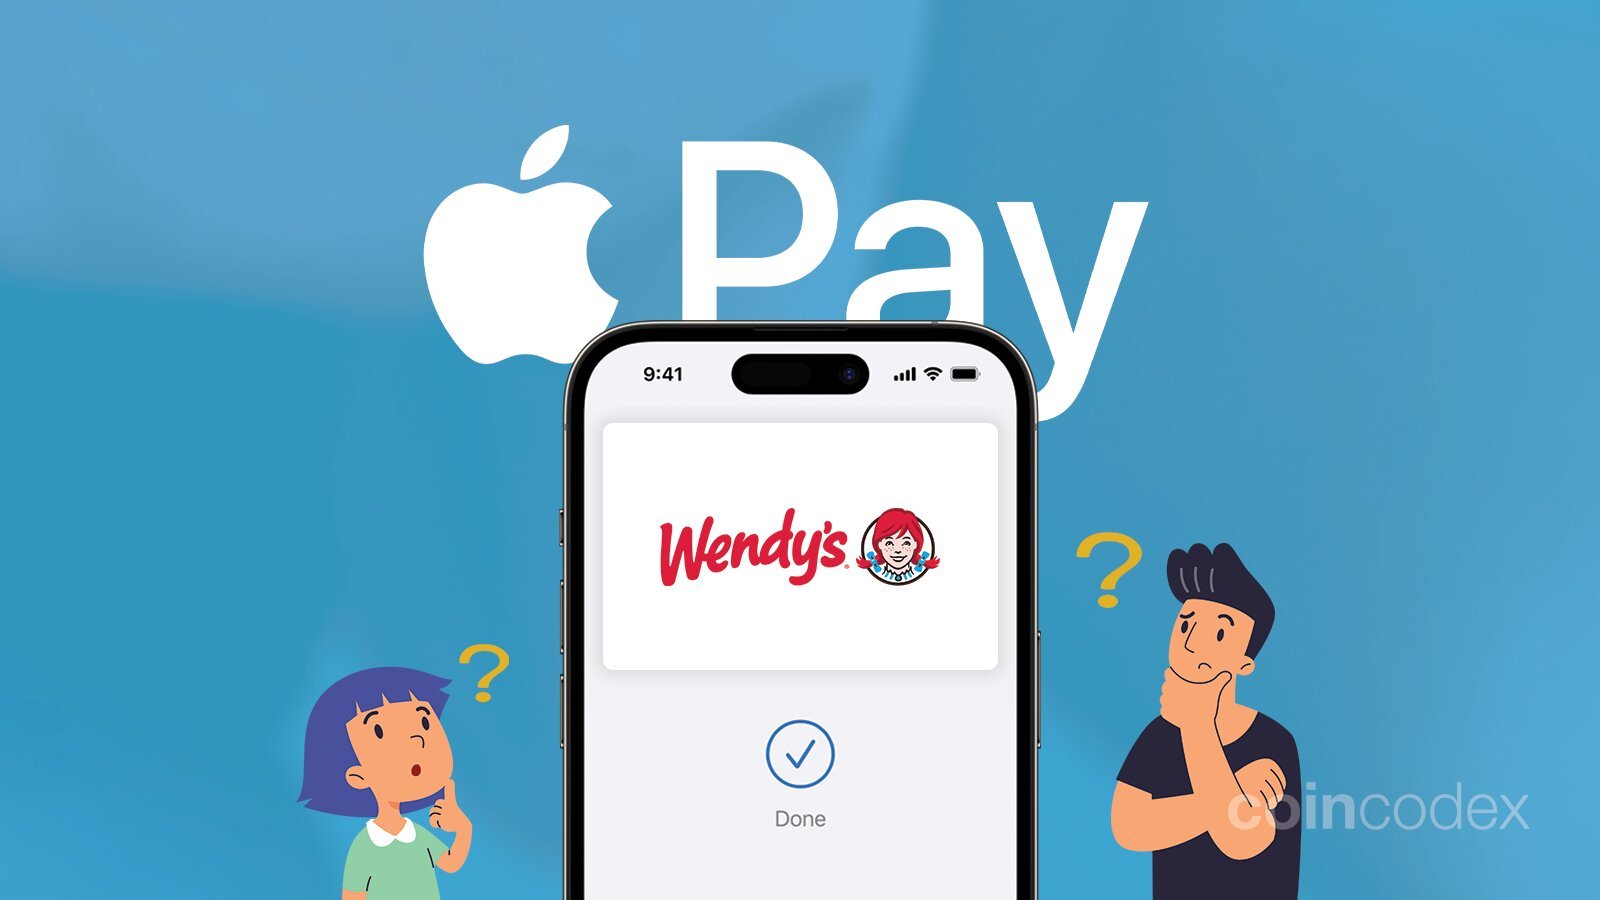 Does Wendys Take Apple Pay